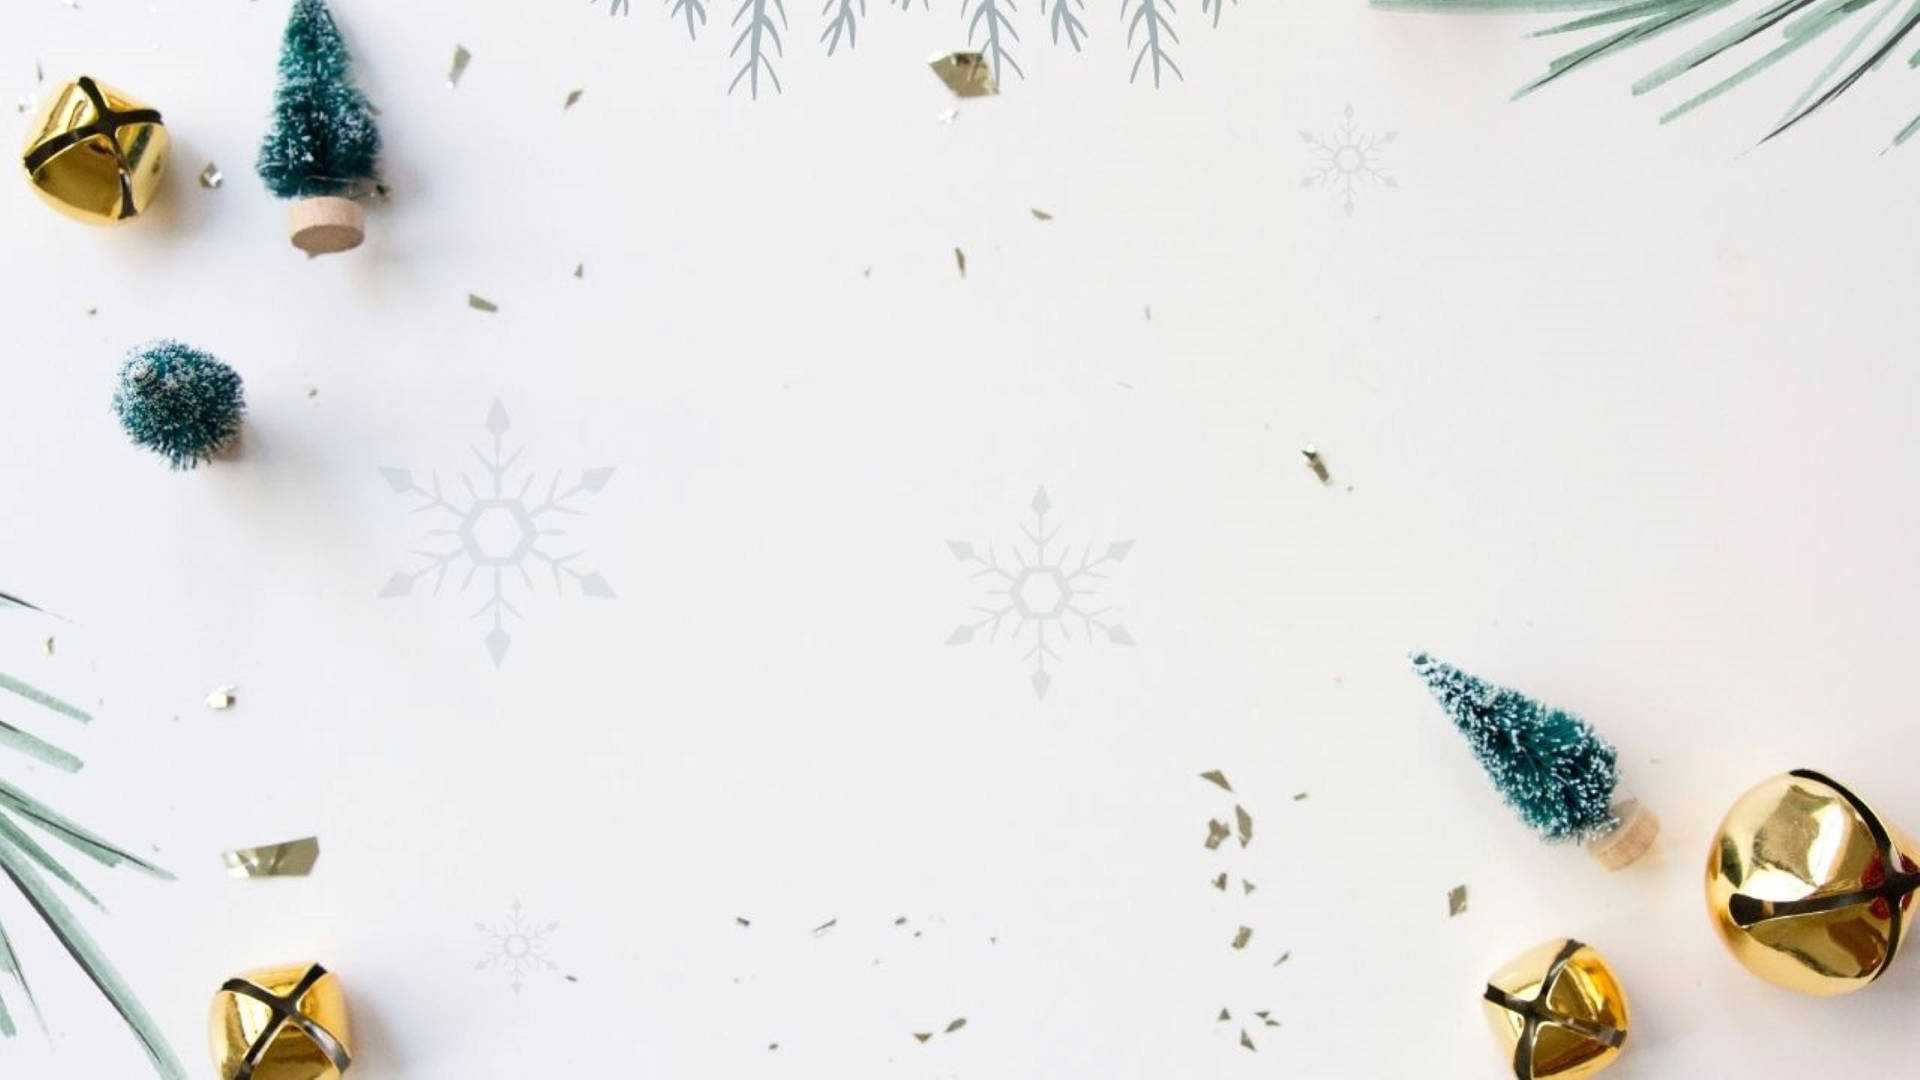 50 Free Christmas Wallpaper Backgrounds For Your iPhone